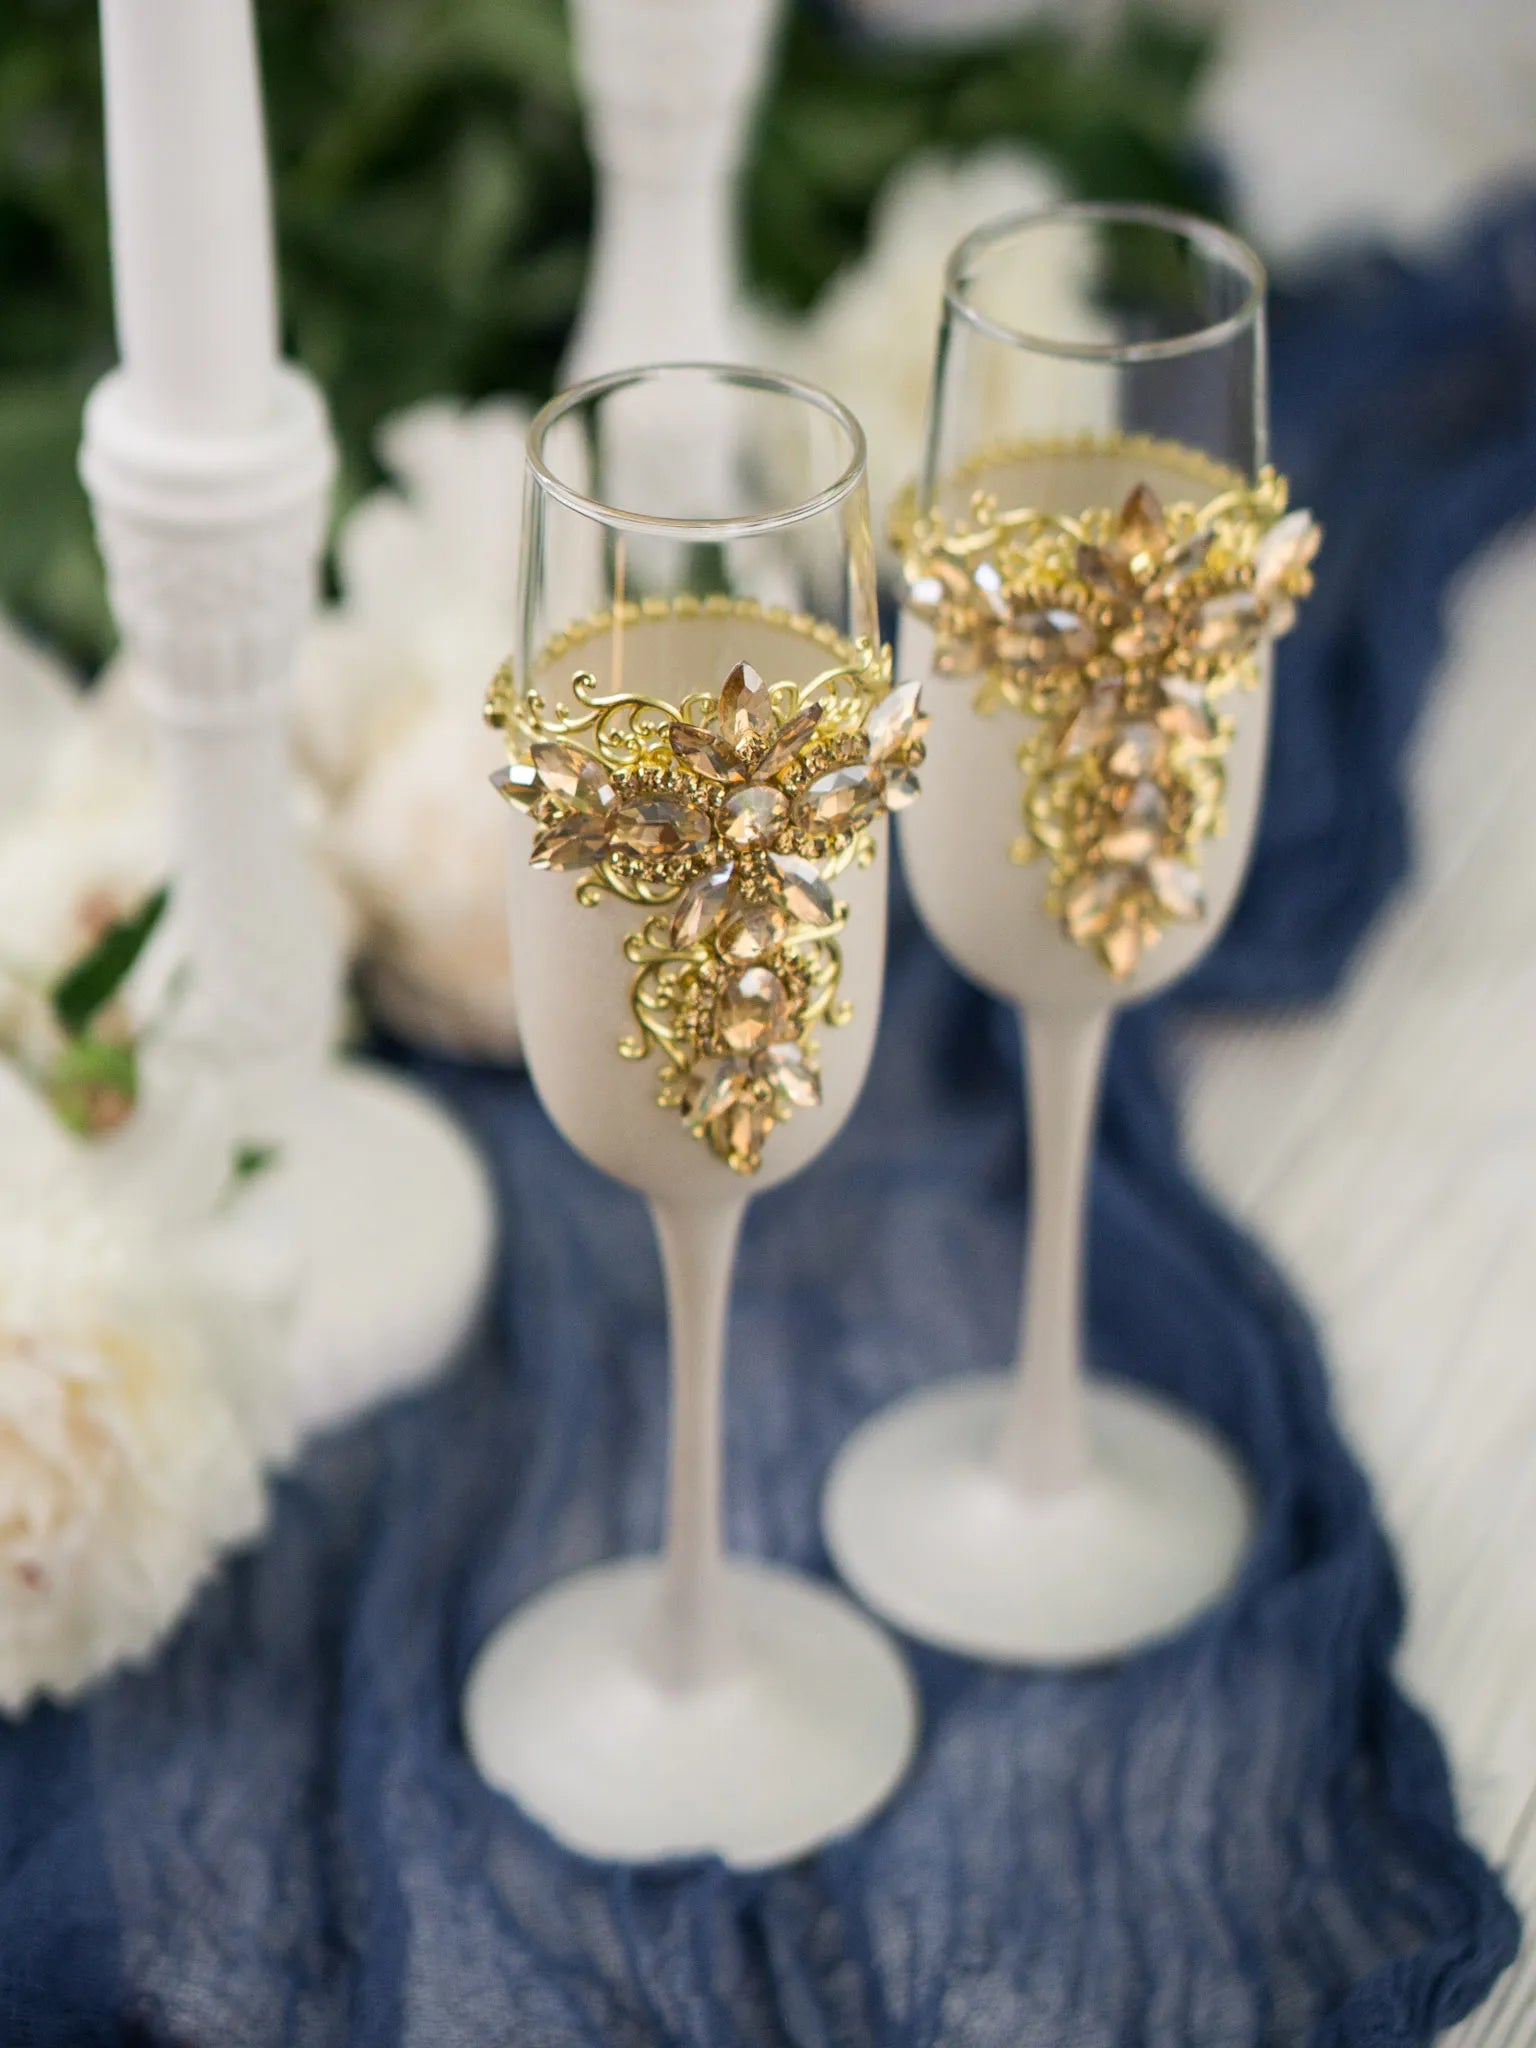 Unique personalized toasting flutes in gold and white